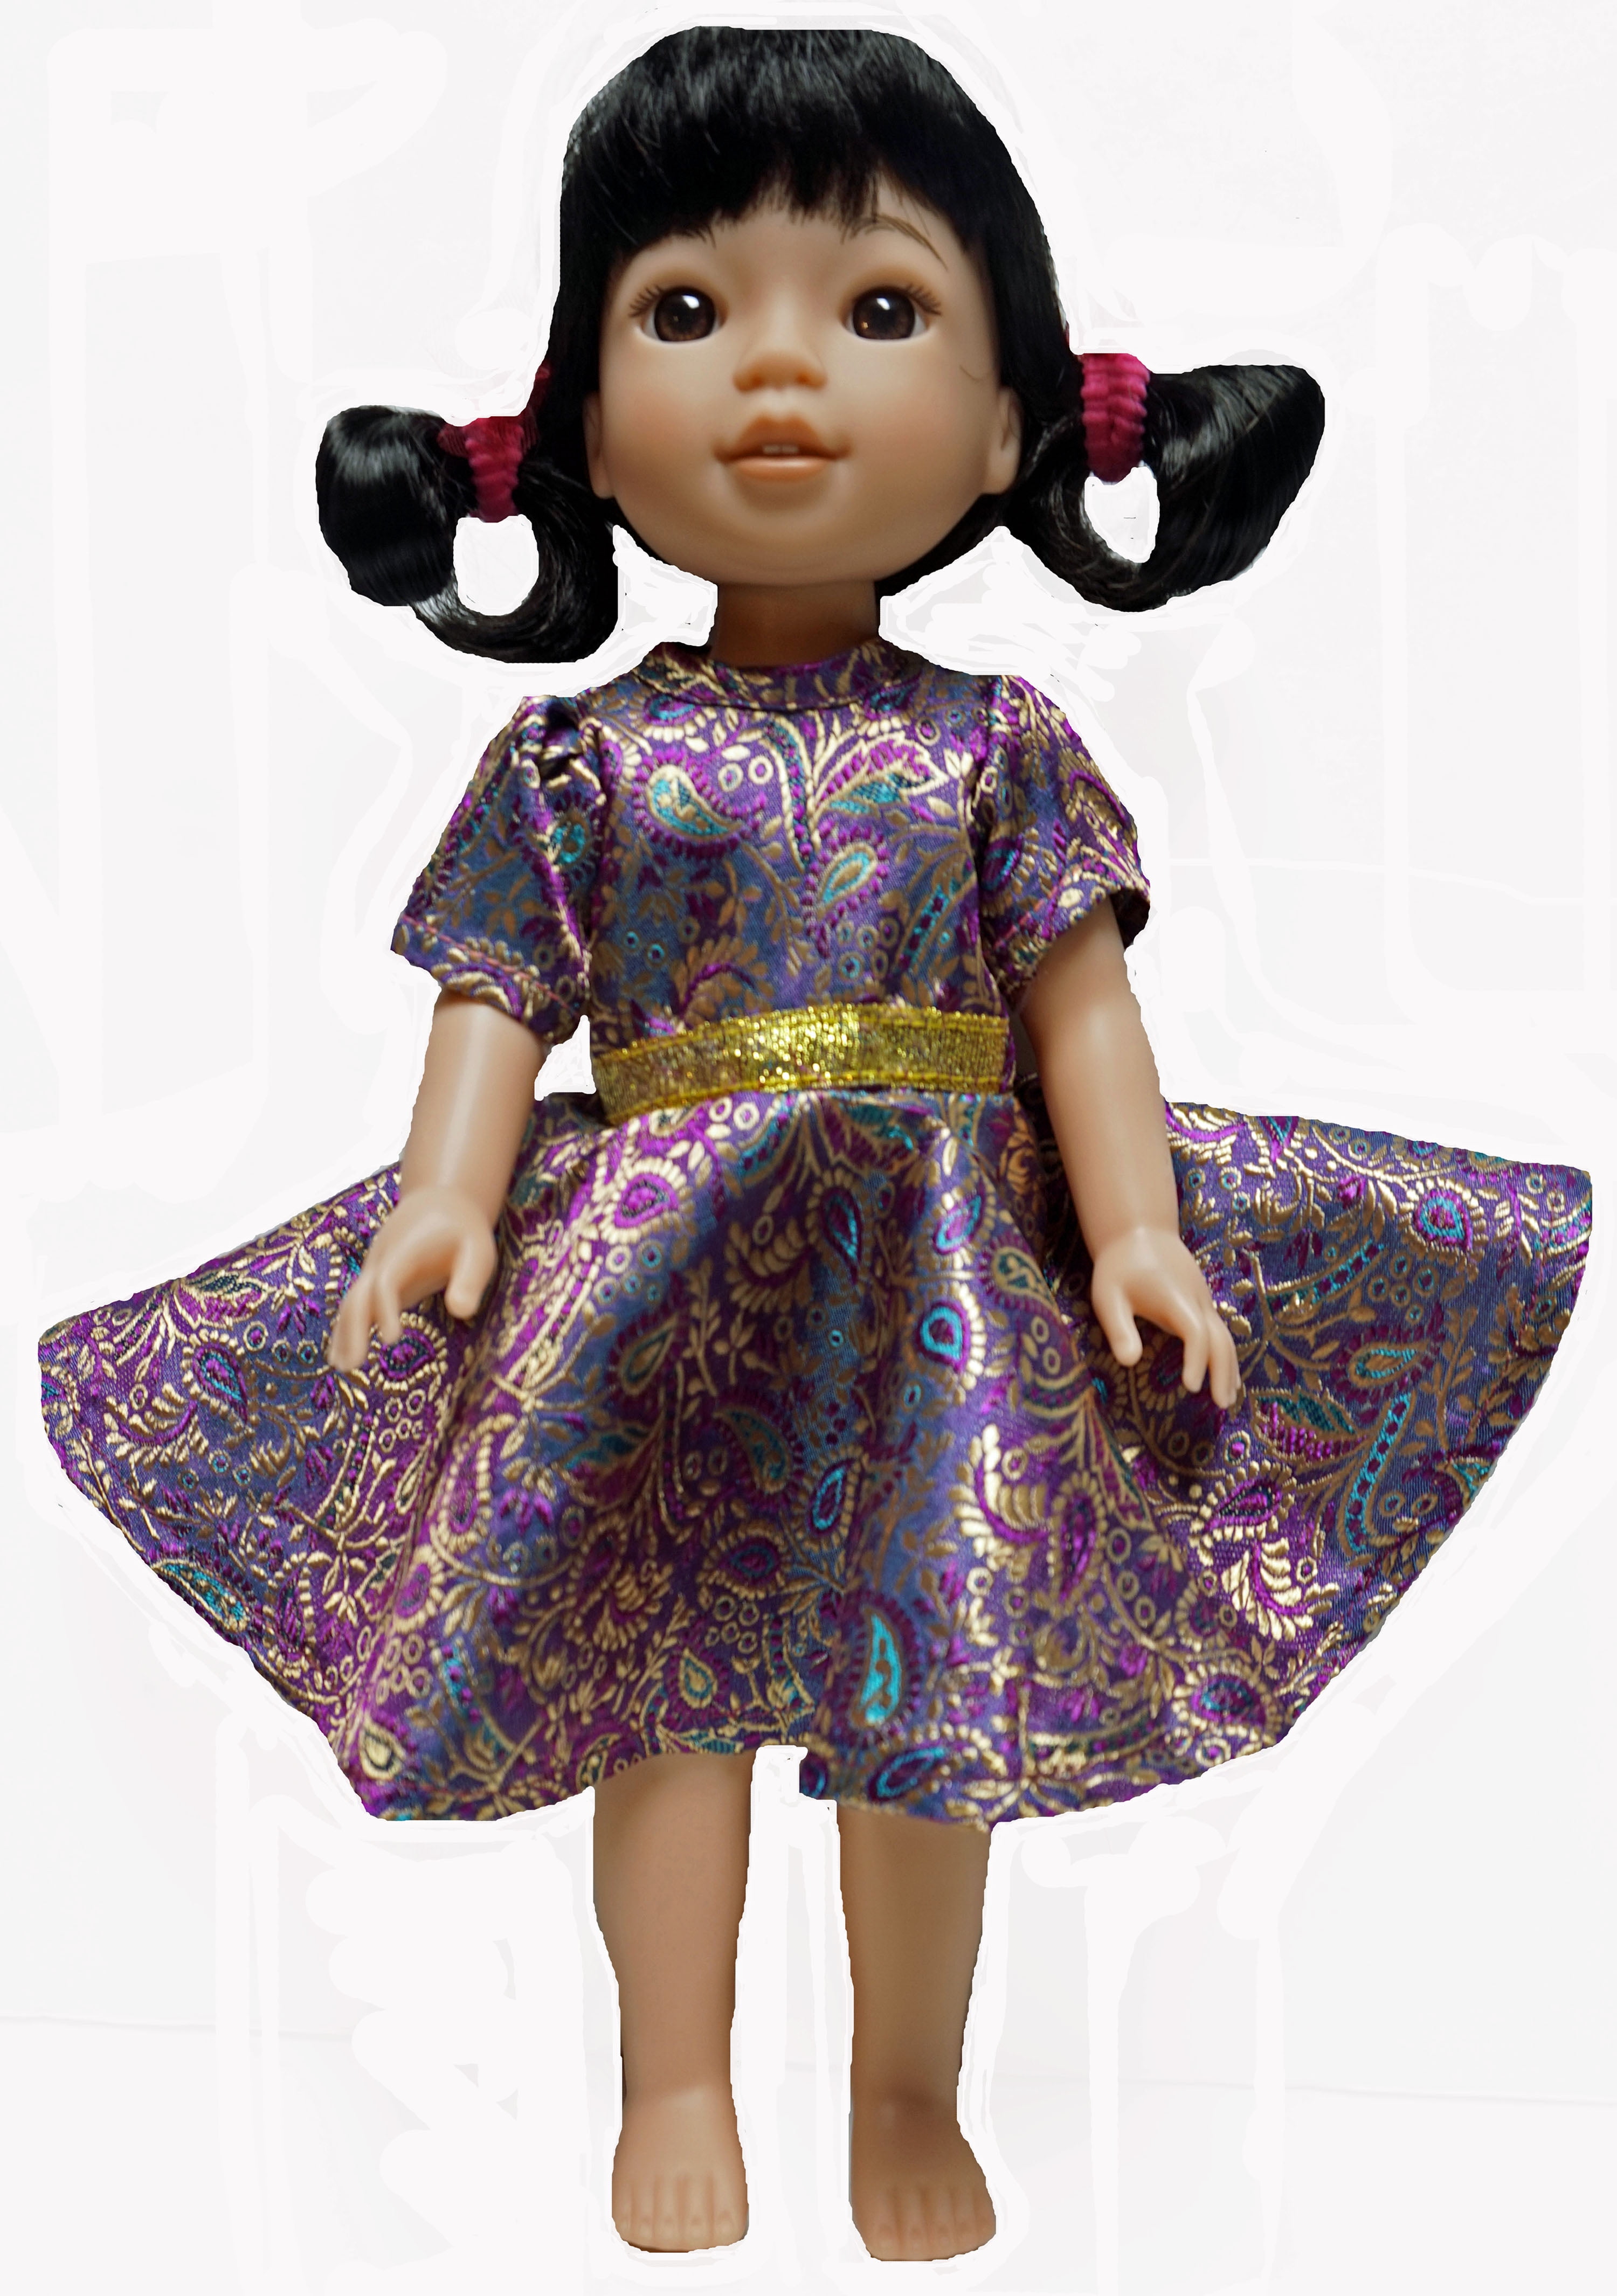 Big Flower Dress Fits 14.5 Inch Dolls Like Wellie Wisher Glitter Girl Dolls Doll Clothes Superstore